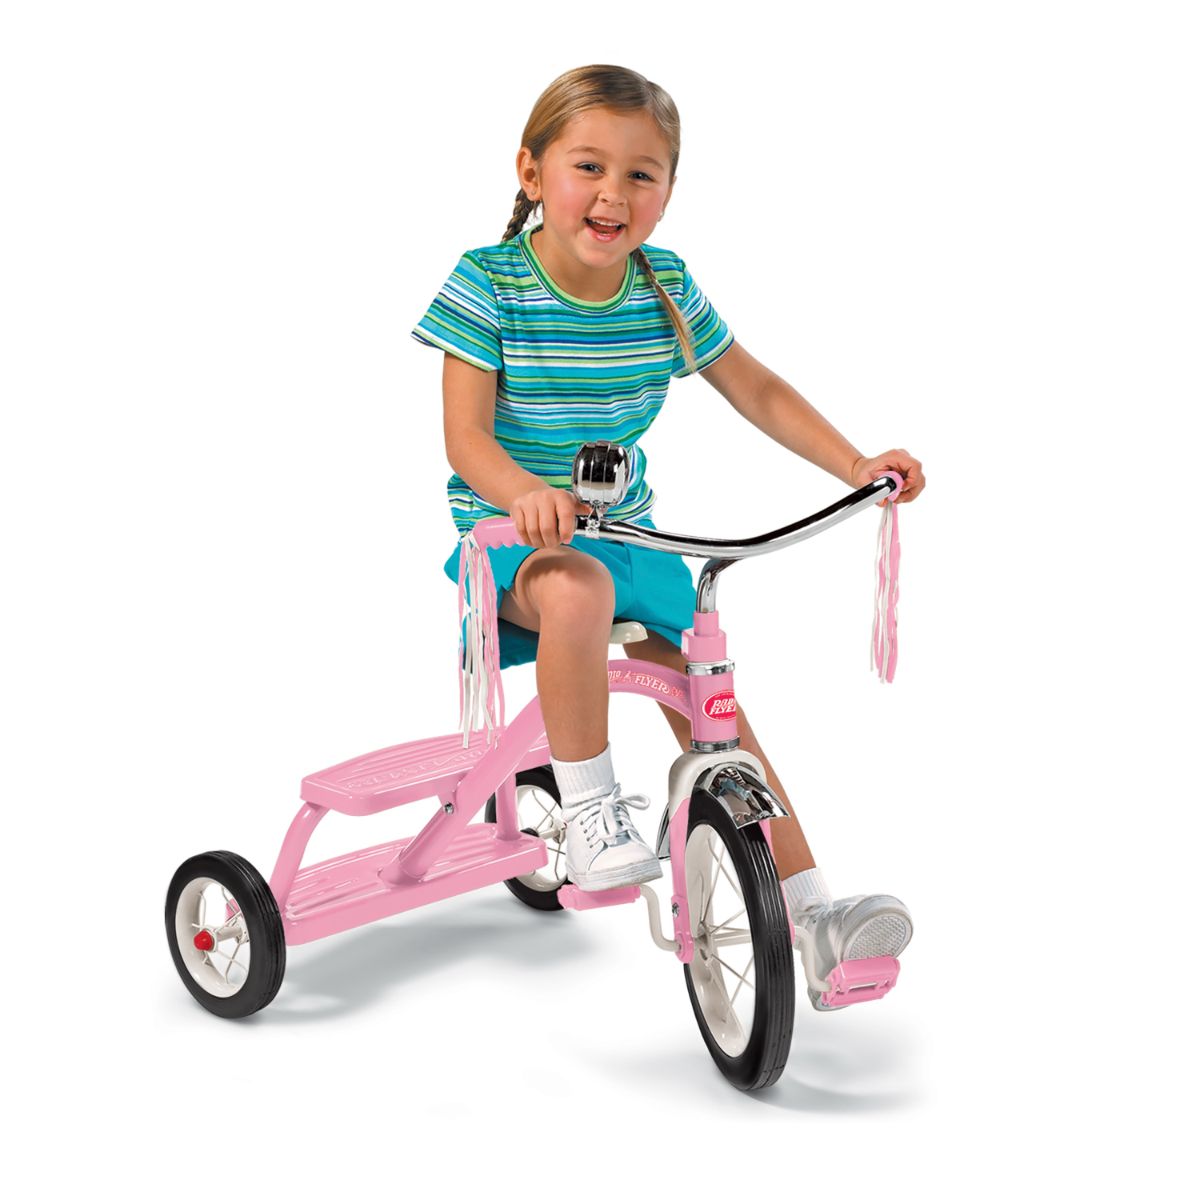 Radio flyer classic pink dual deck tricycle